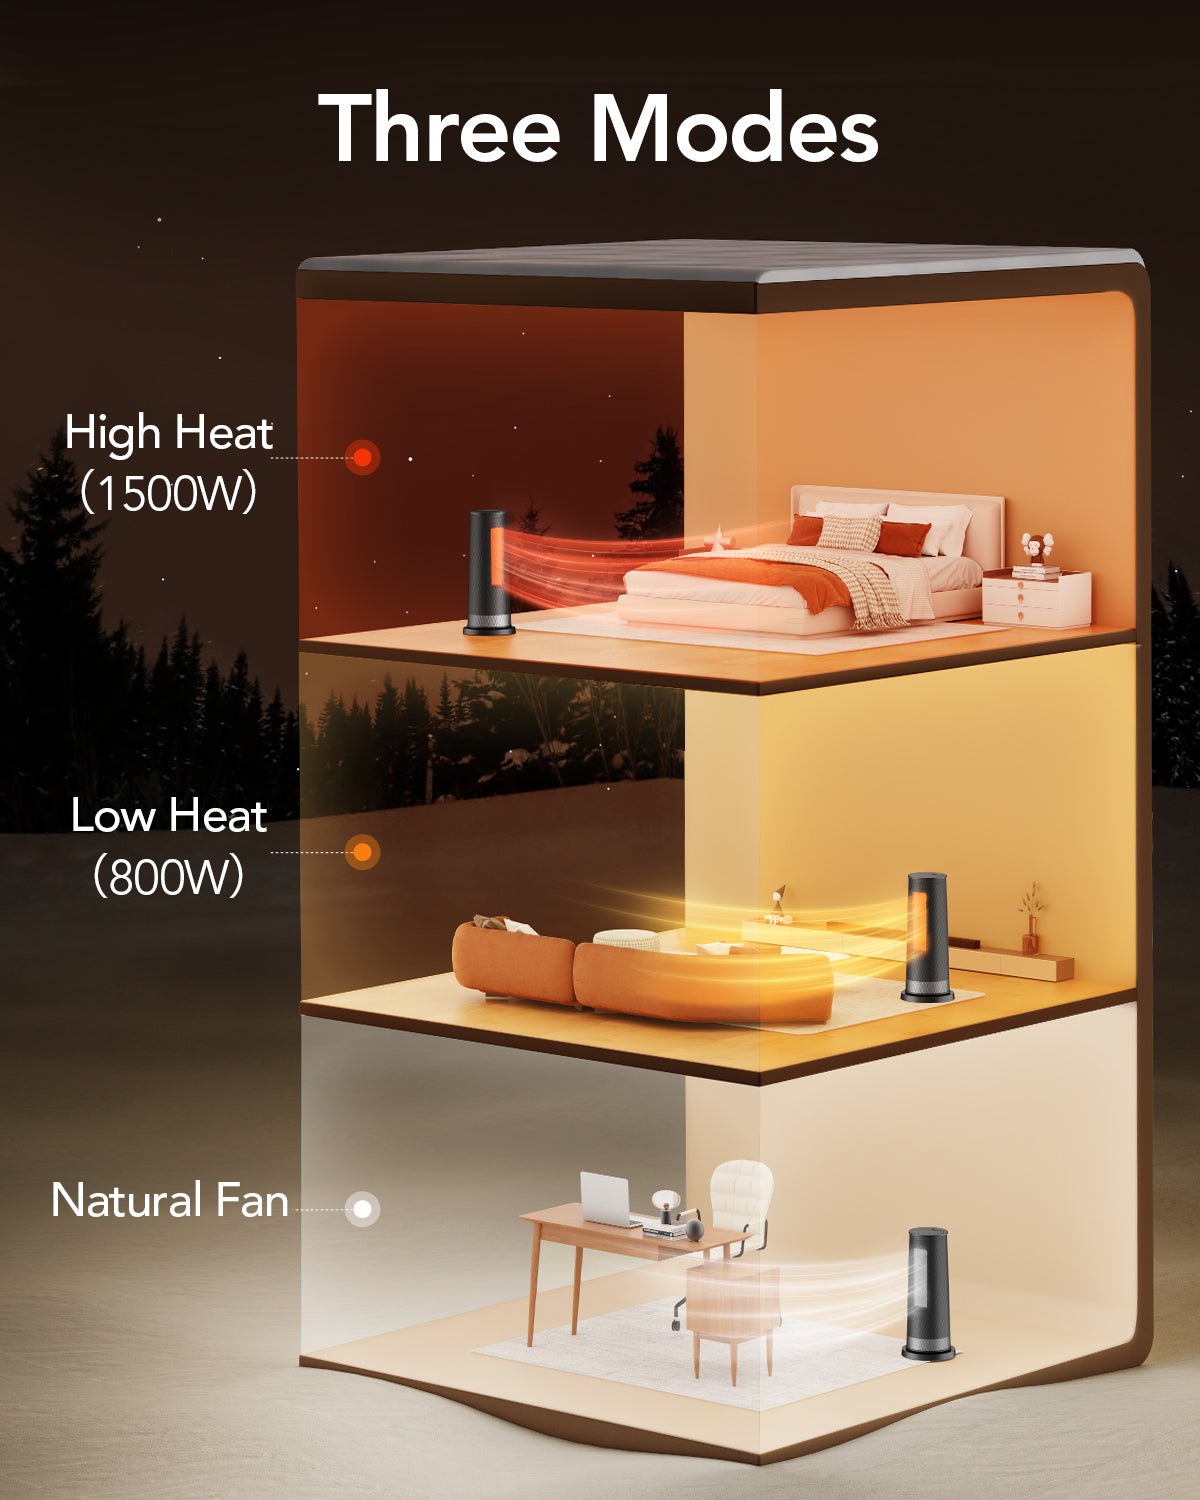 iDOO Space Heaters for Indoor Use, Portable Heater for Bedroom, Tip-Over Protection, Ceramic Fast Heat with Night Light, 80° Oscillating, for Large Rooms, Office, Living Room, Black - by idoo